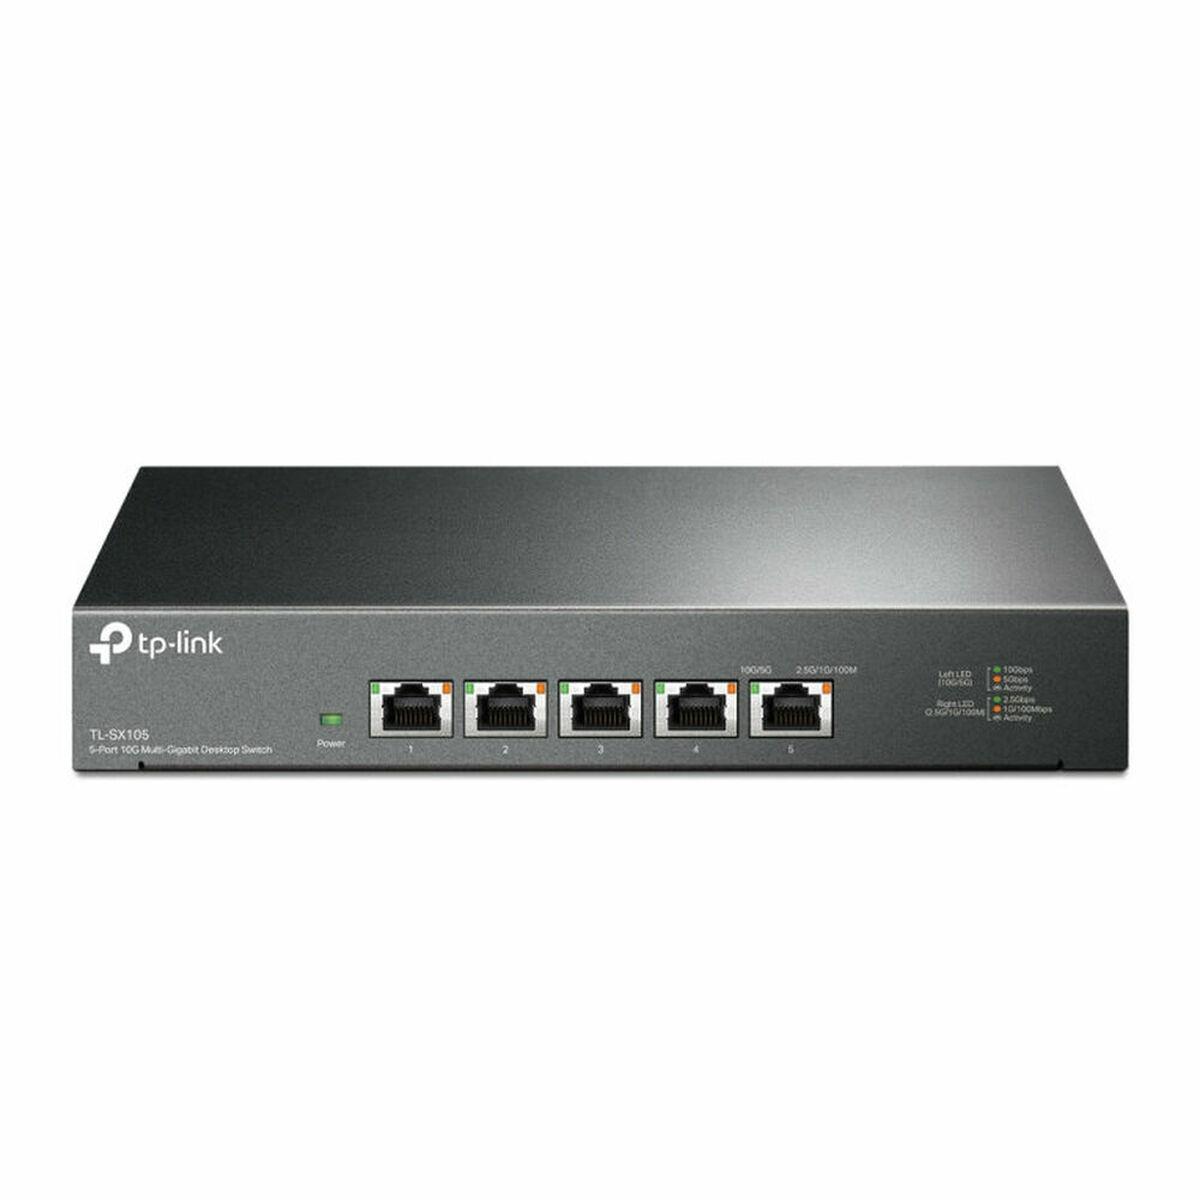 TP-LINK 6935 5 Switch